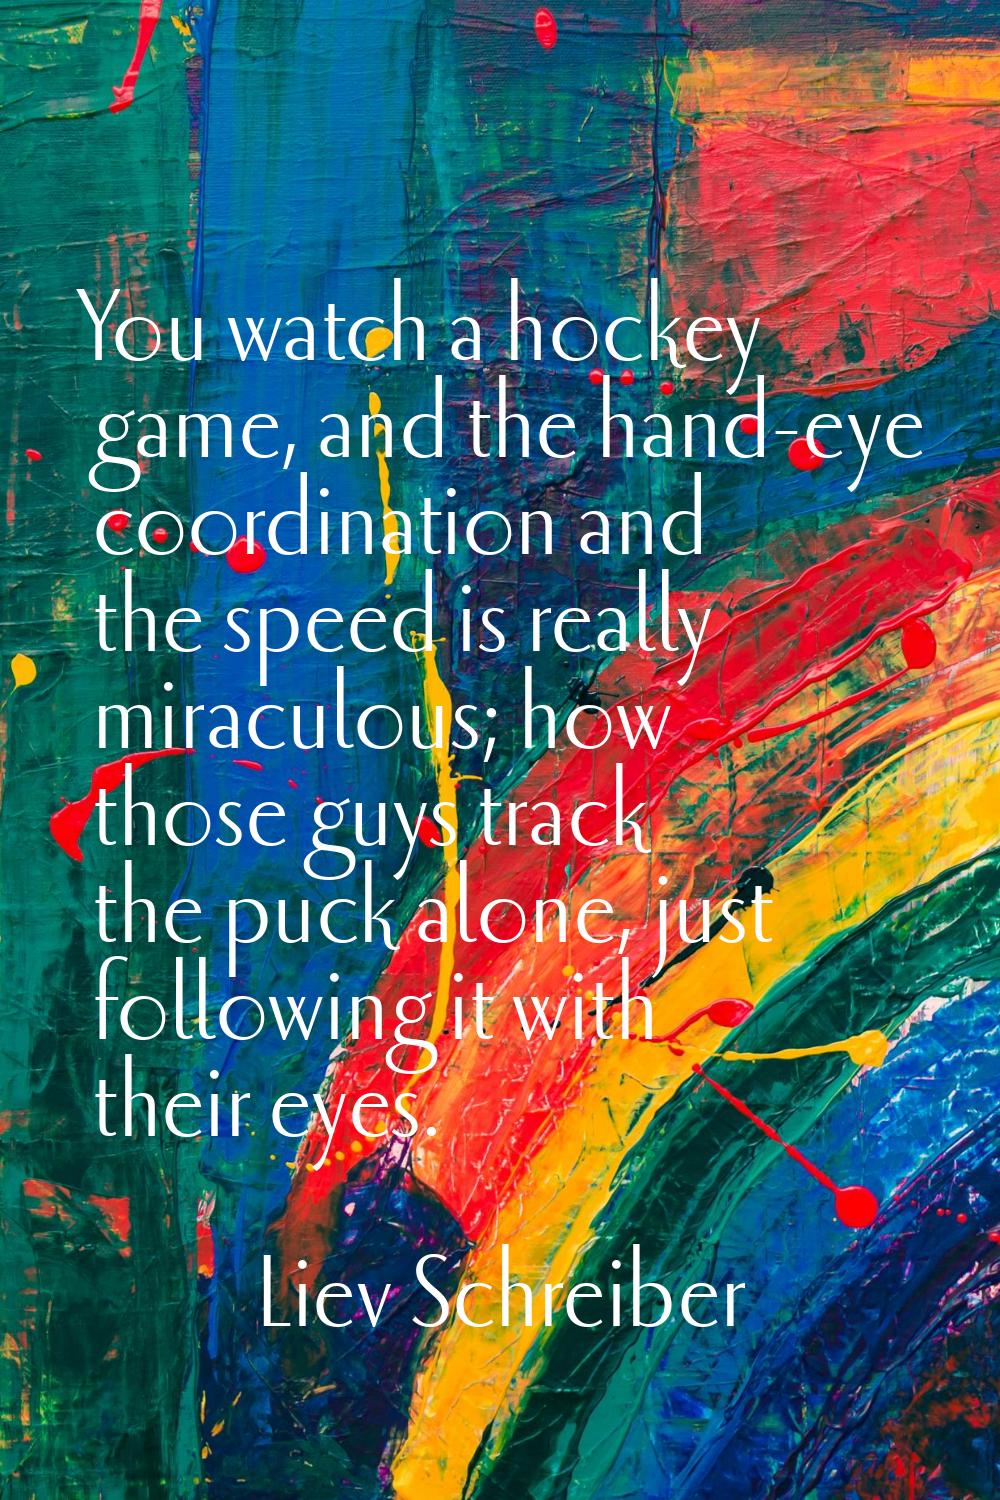 You watch a hockey game, and the hand-eye coordination and the speed is really miraculous; how thos